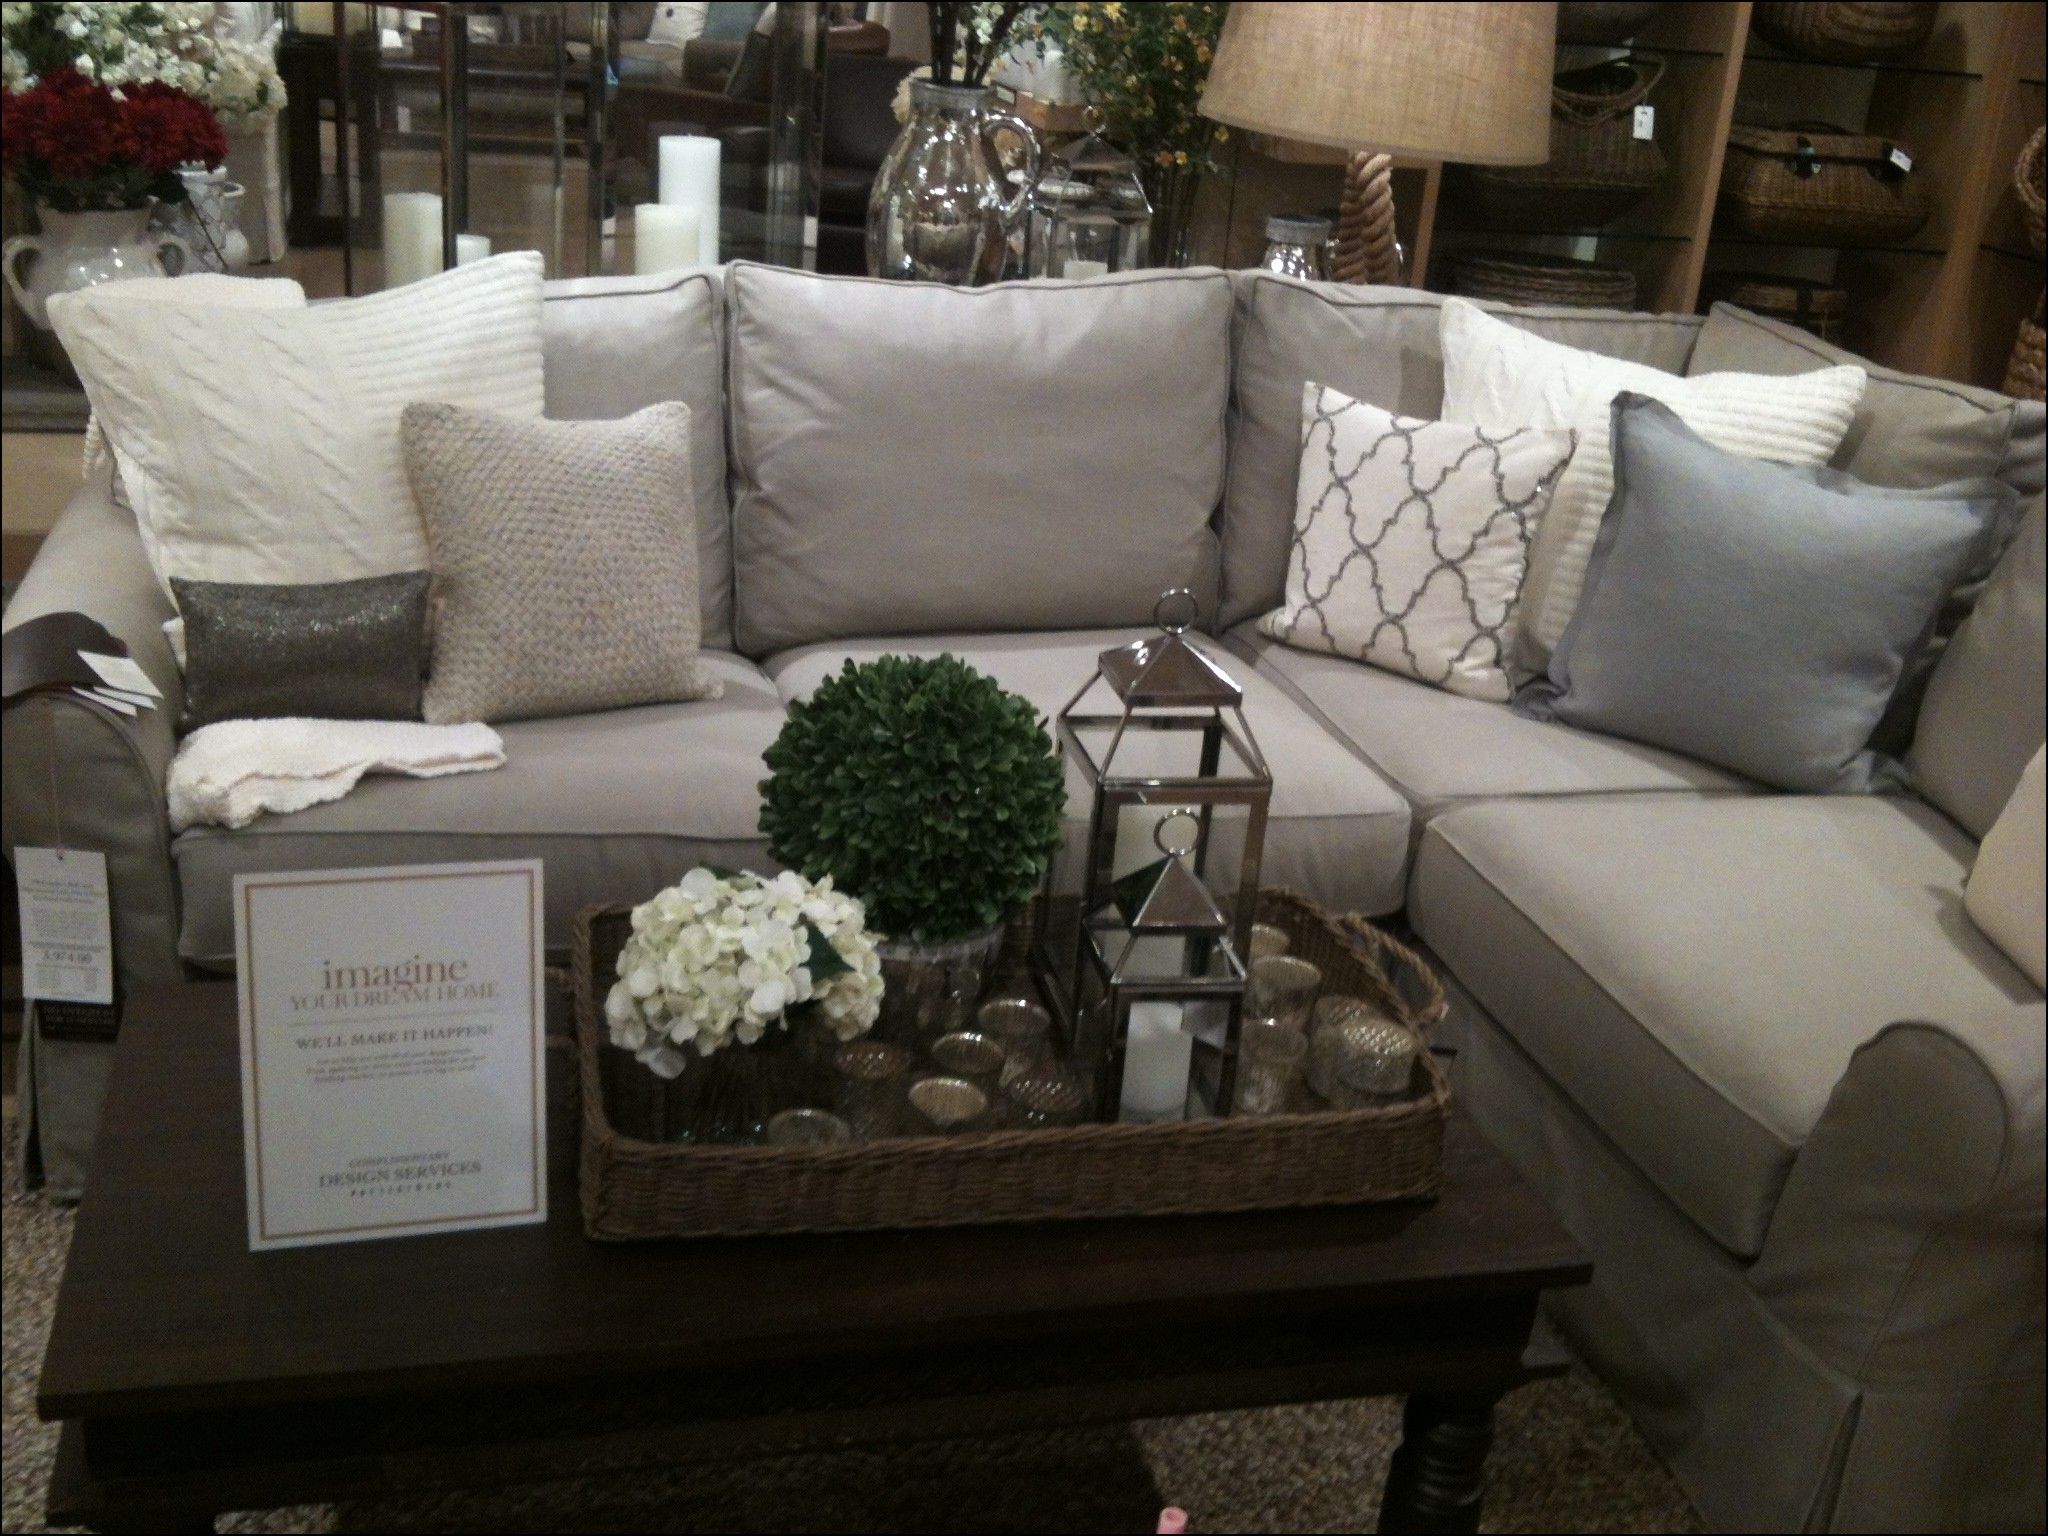 Sectional Sofas Pottery Barn | Decorating Ideas | Pinterest Regarding Pottery Barn Sectional Sofas (View 2 of 10)